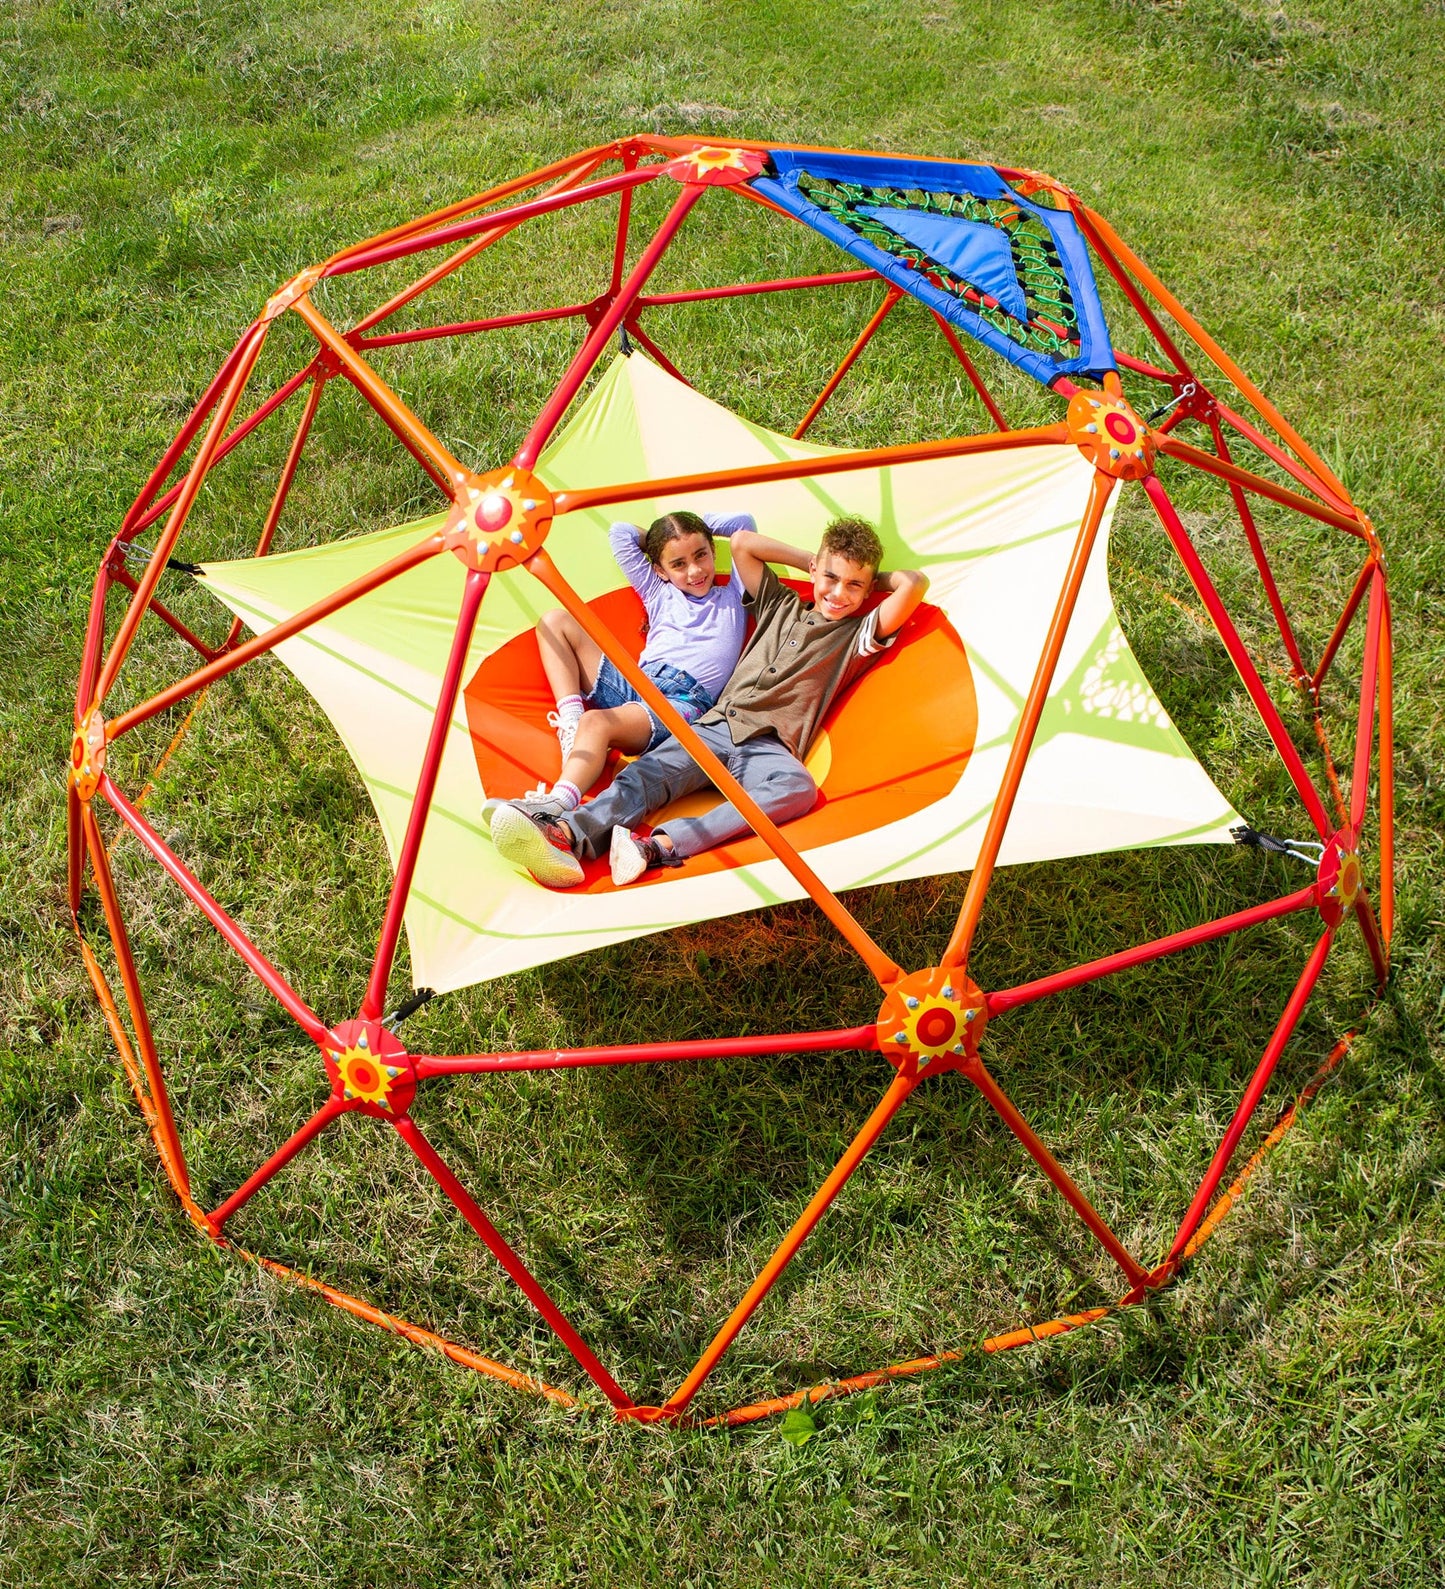 SunRise Climbing Dome with Accessories